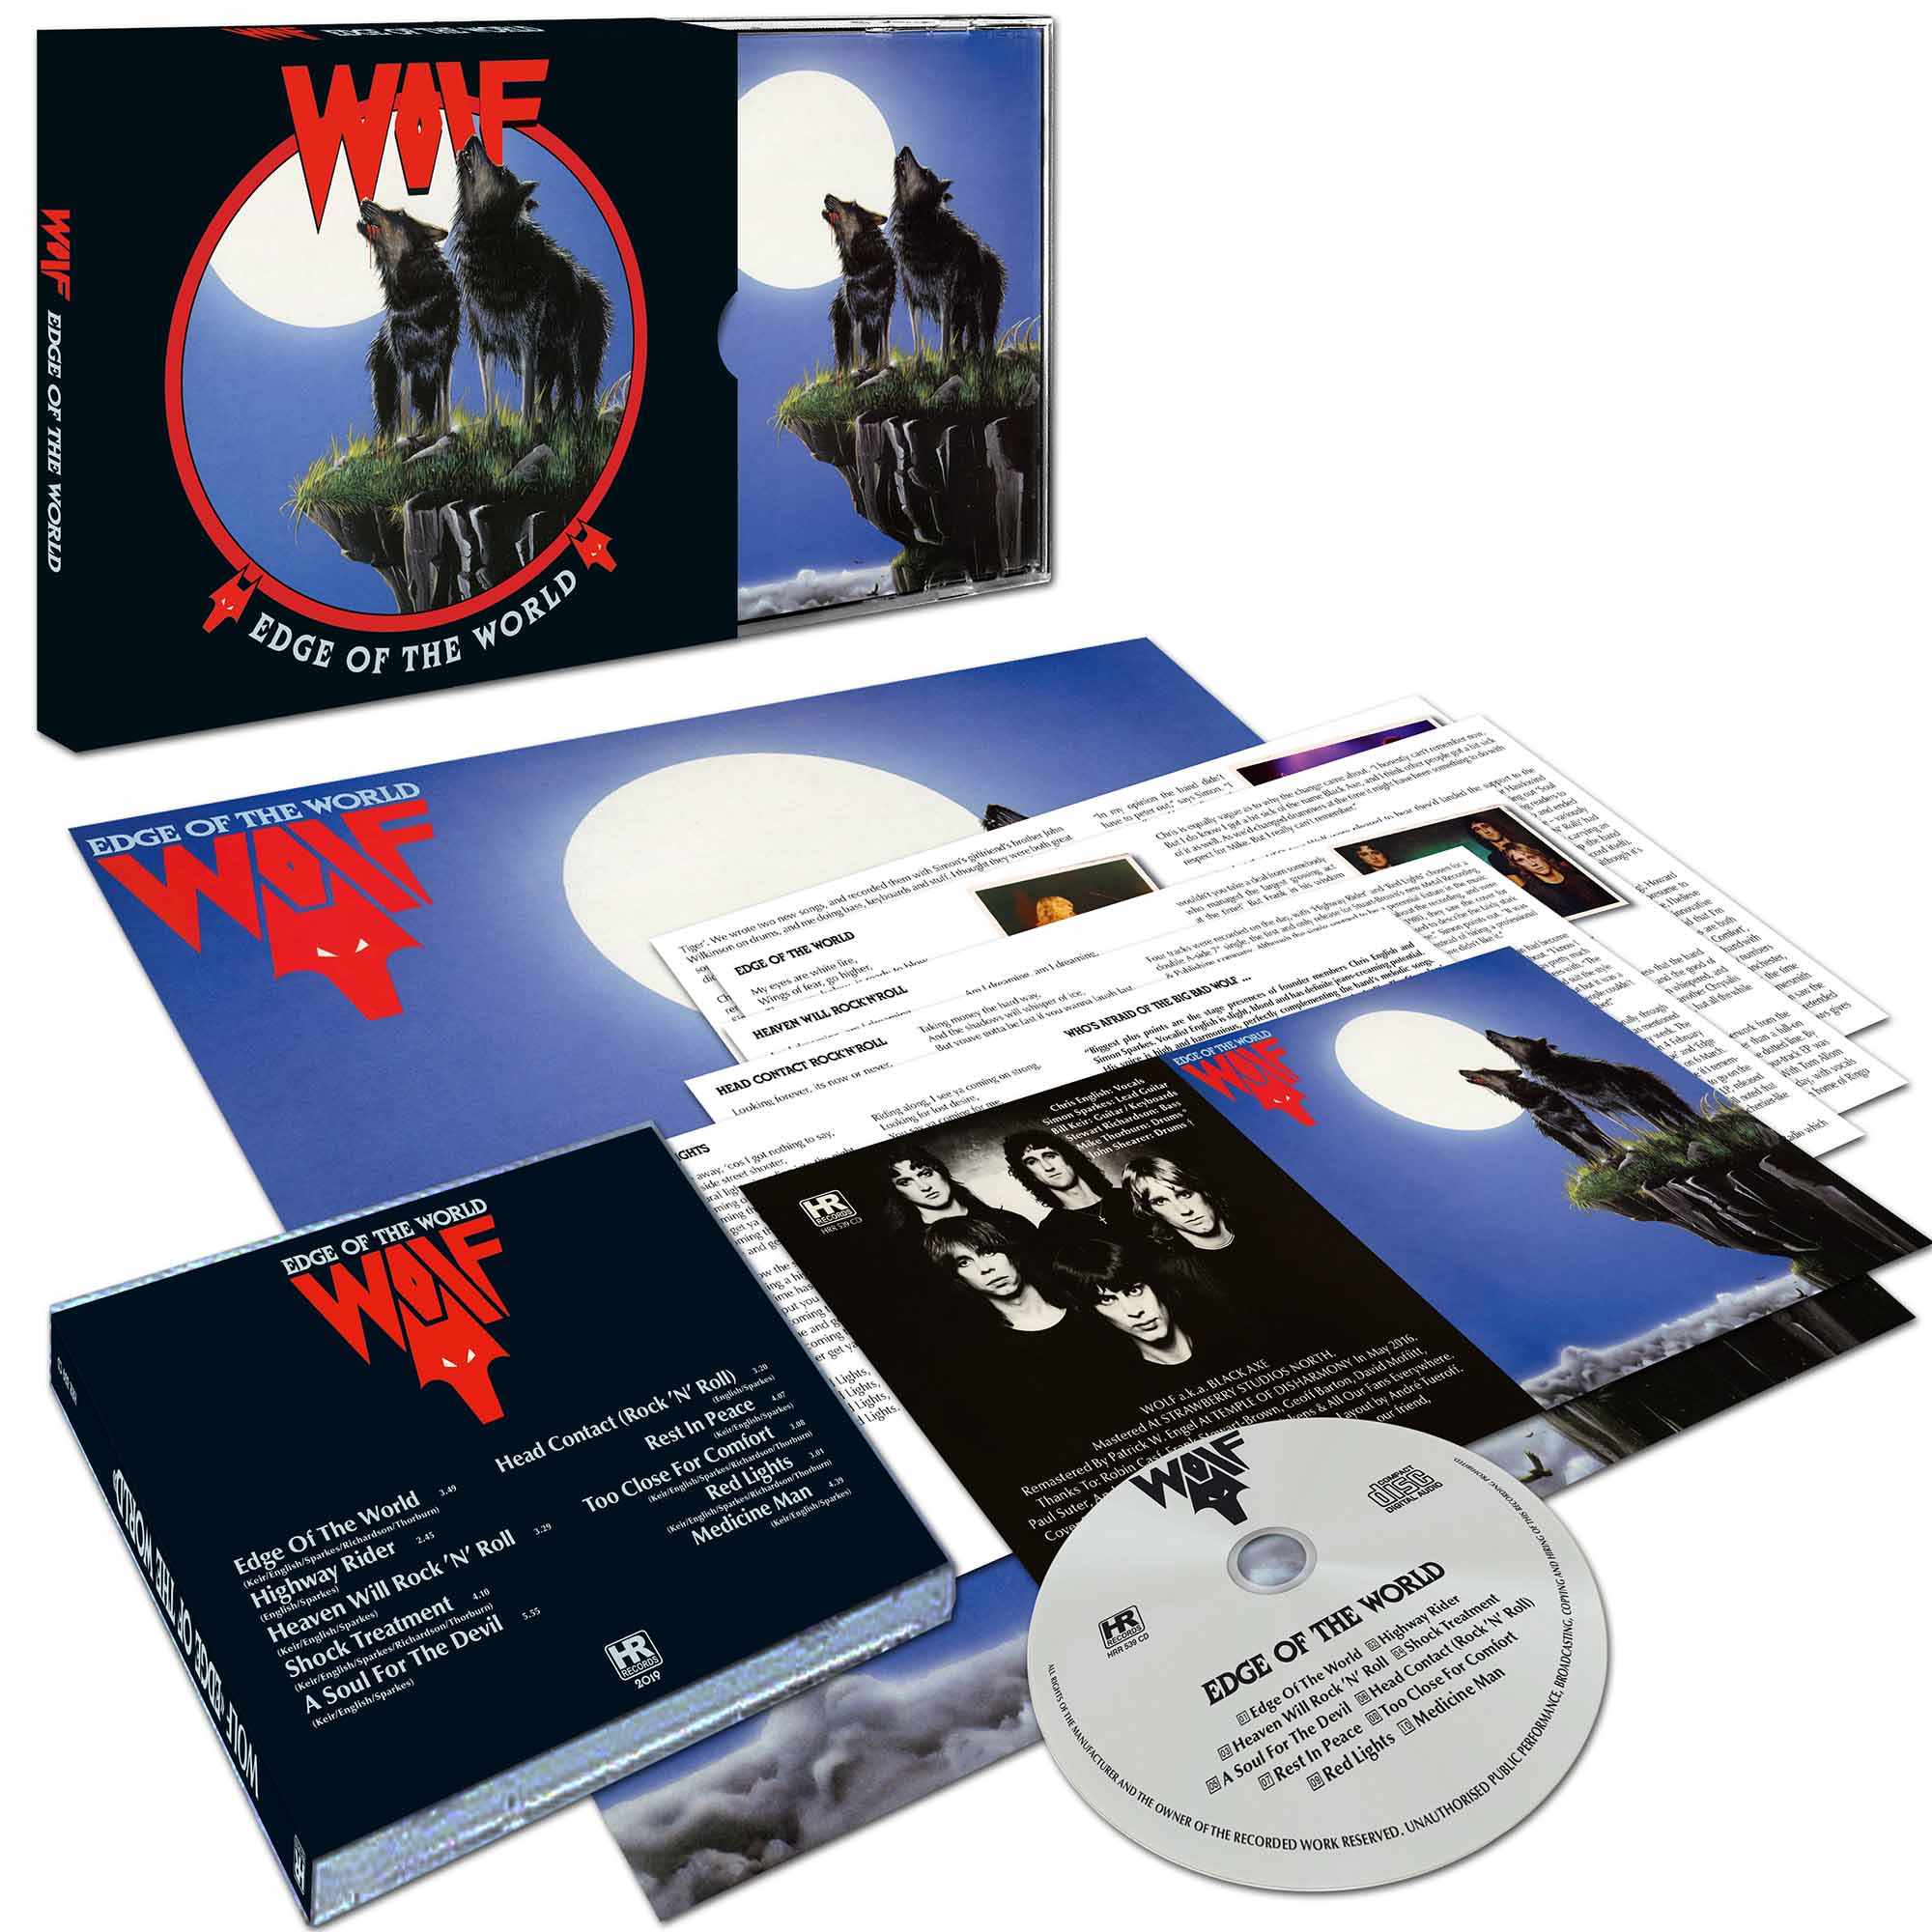 WOLF -  Edge of the World  CD